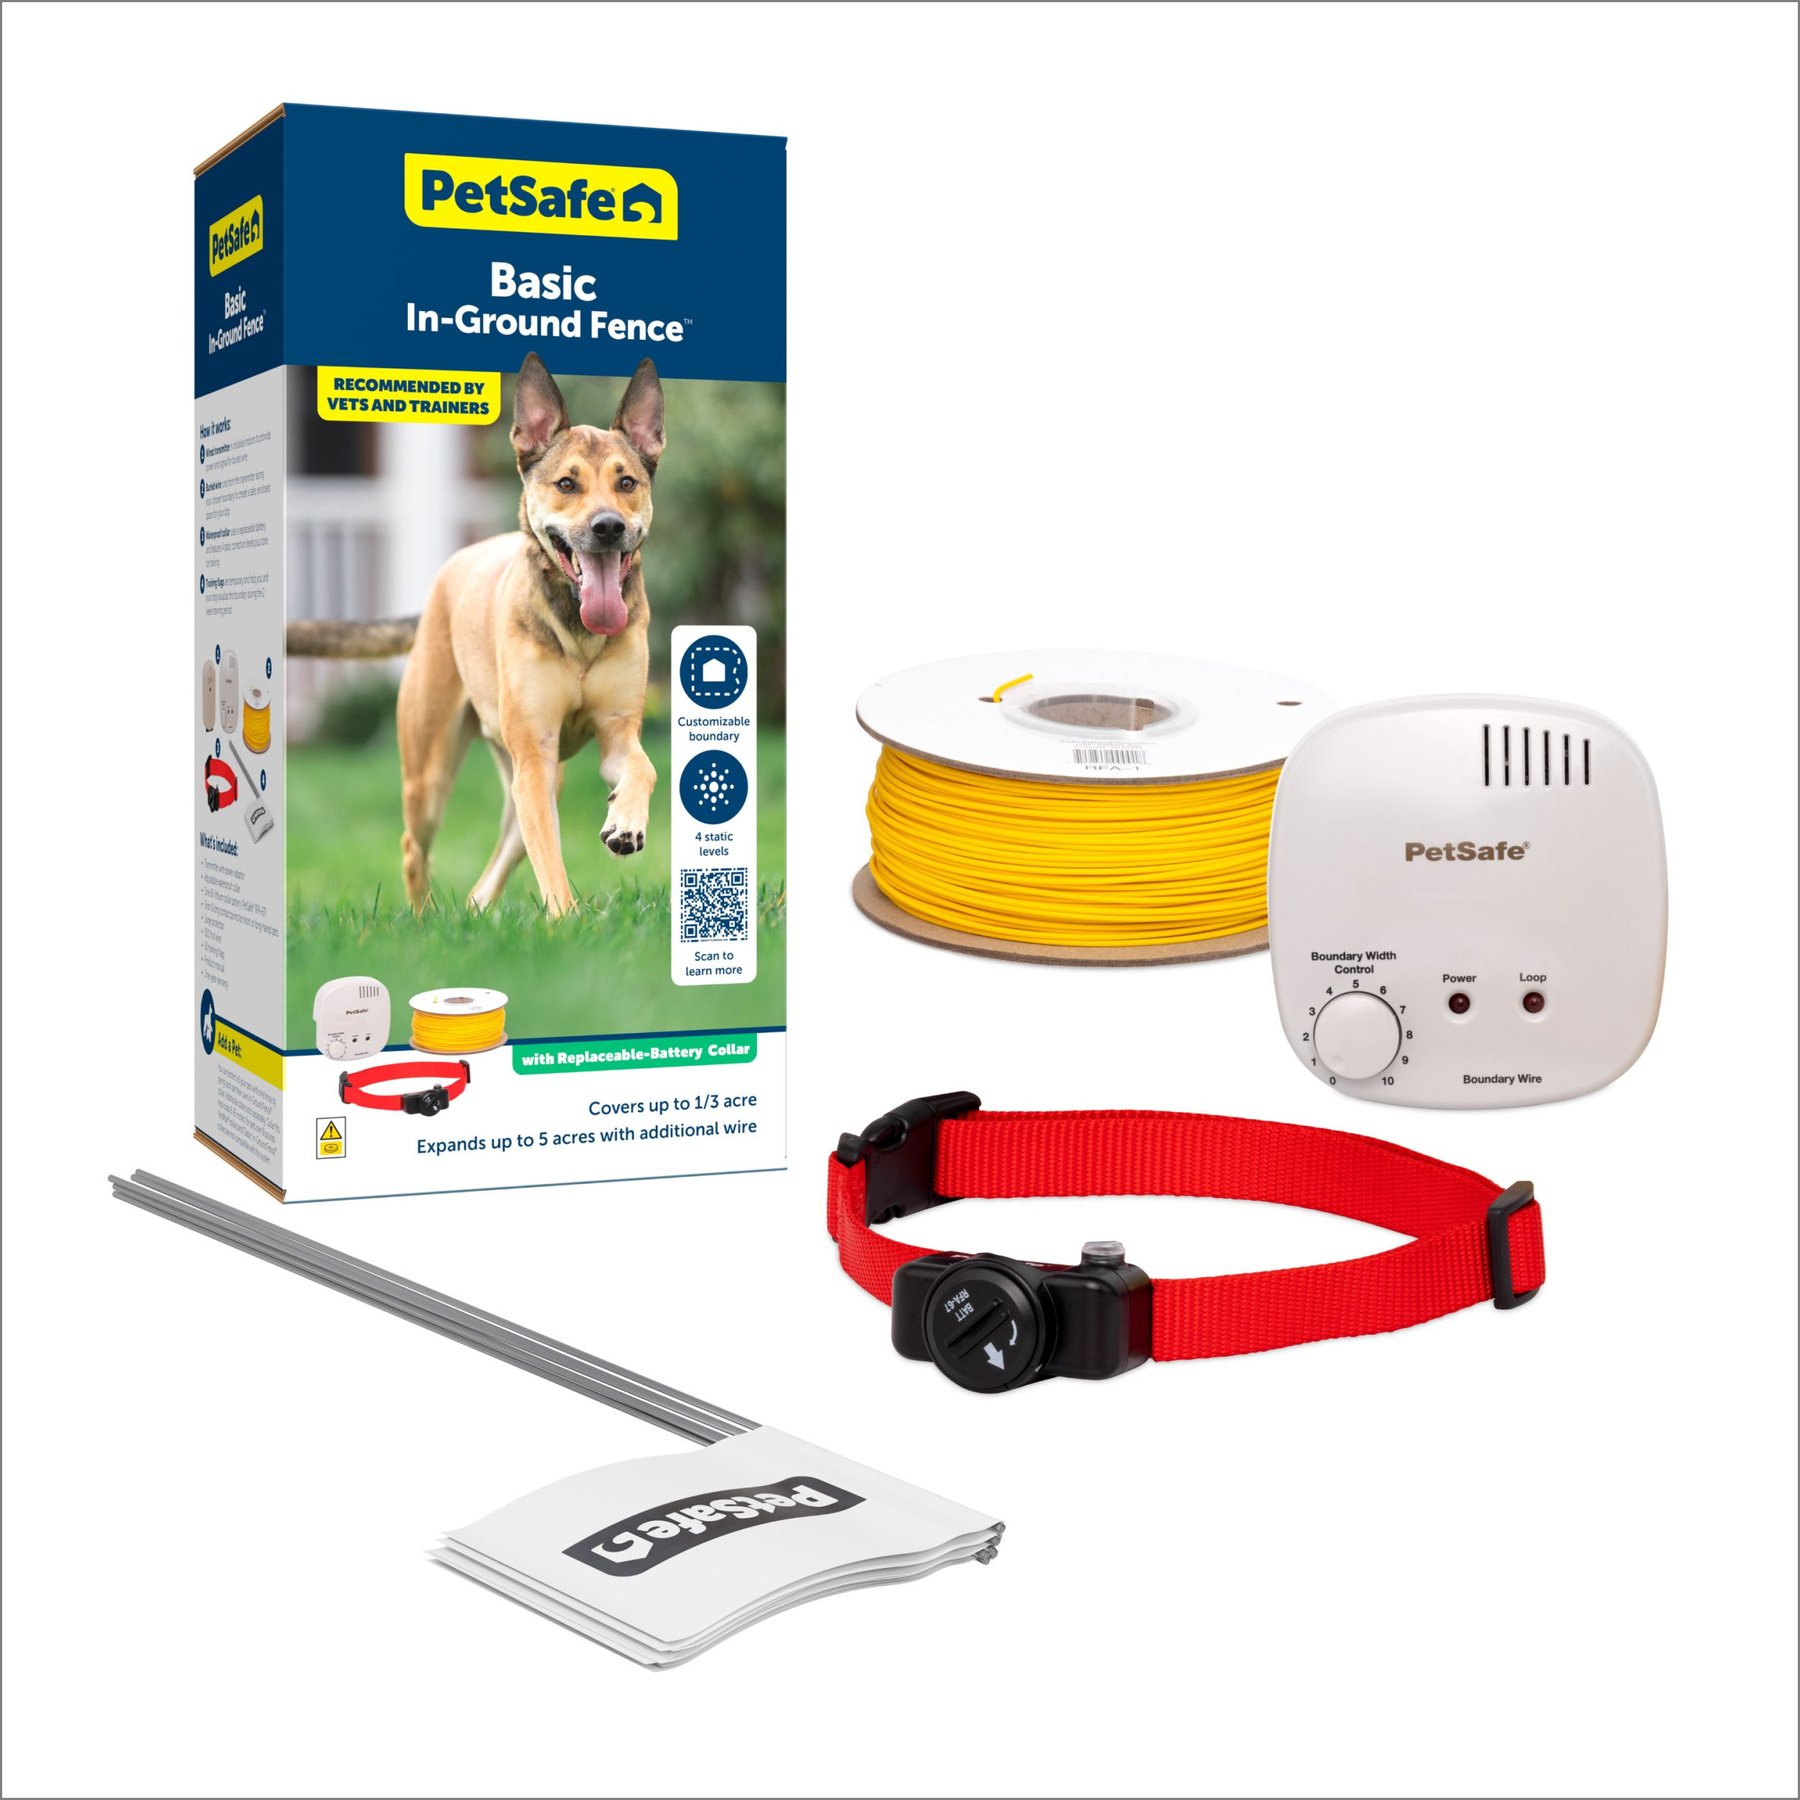  PetSafe Rechargeable In-Ground Pet Fence for Dogs and